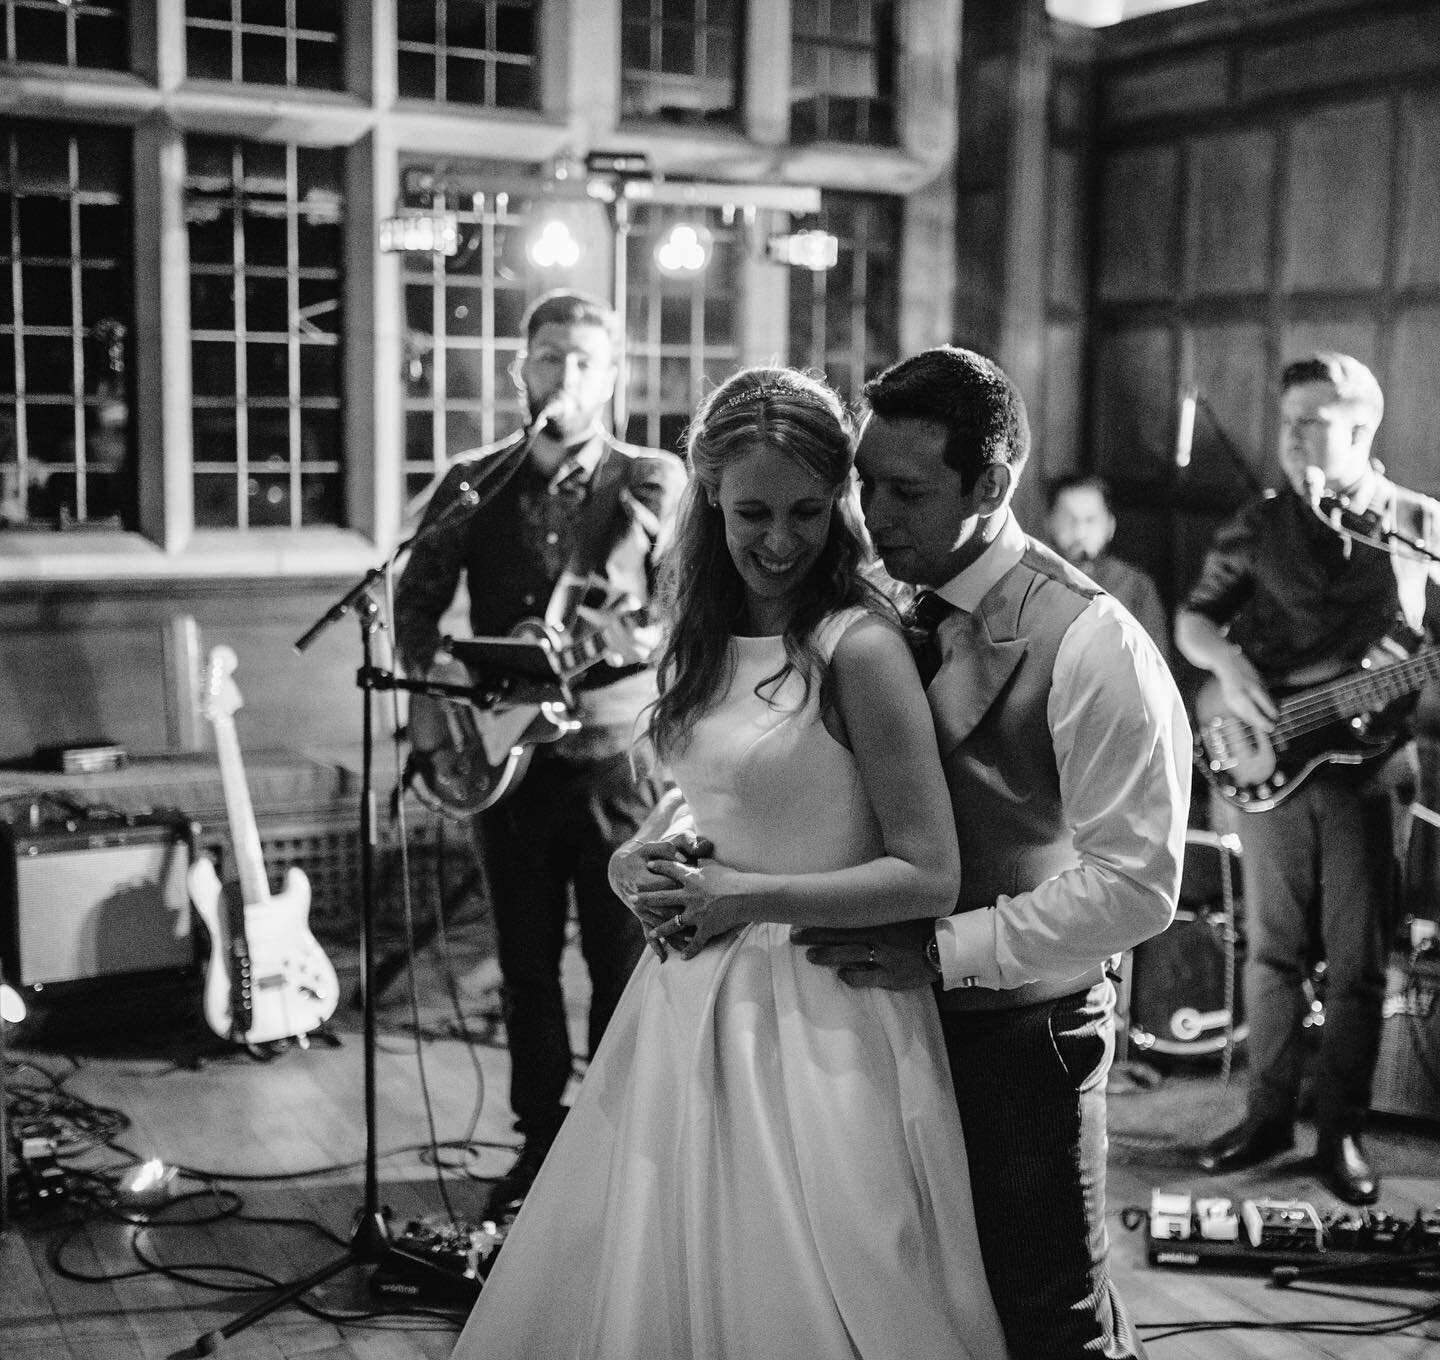 VALENTINES // Remember the days and make more magical moments to remember. 

Wedding: E&amp;B
Photographer: @jacobmalinskiphoto 

#balcombeplace #love #firstdance